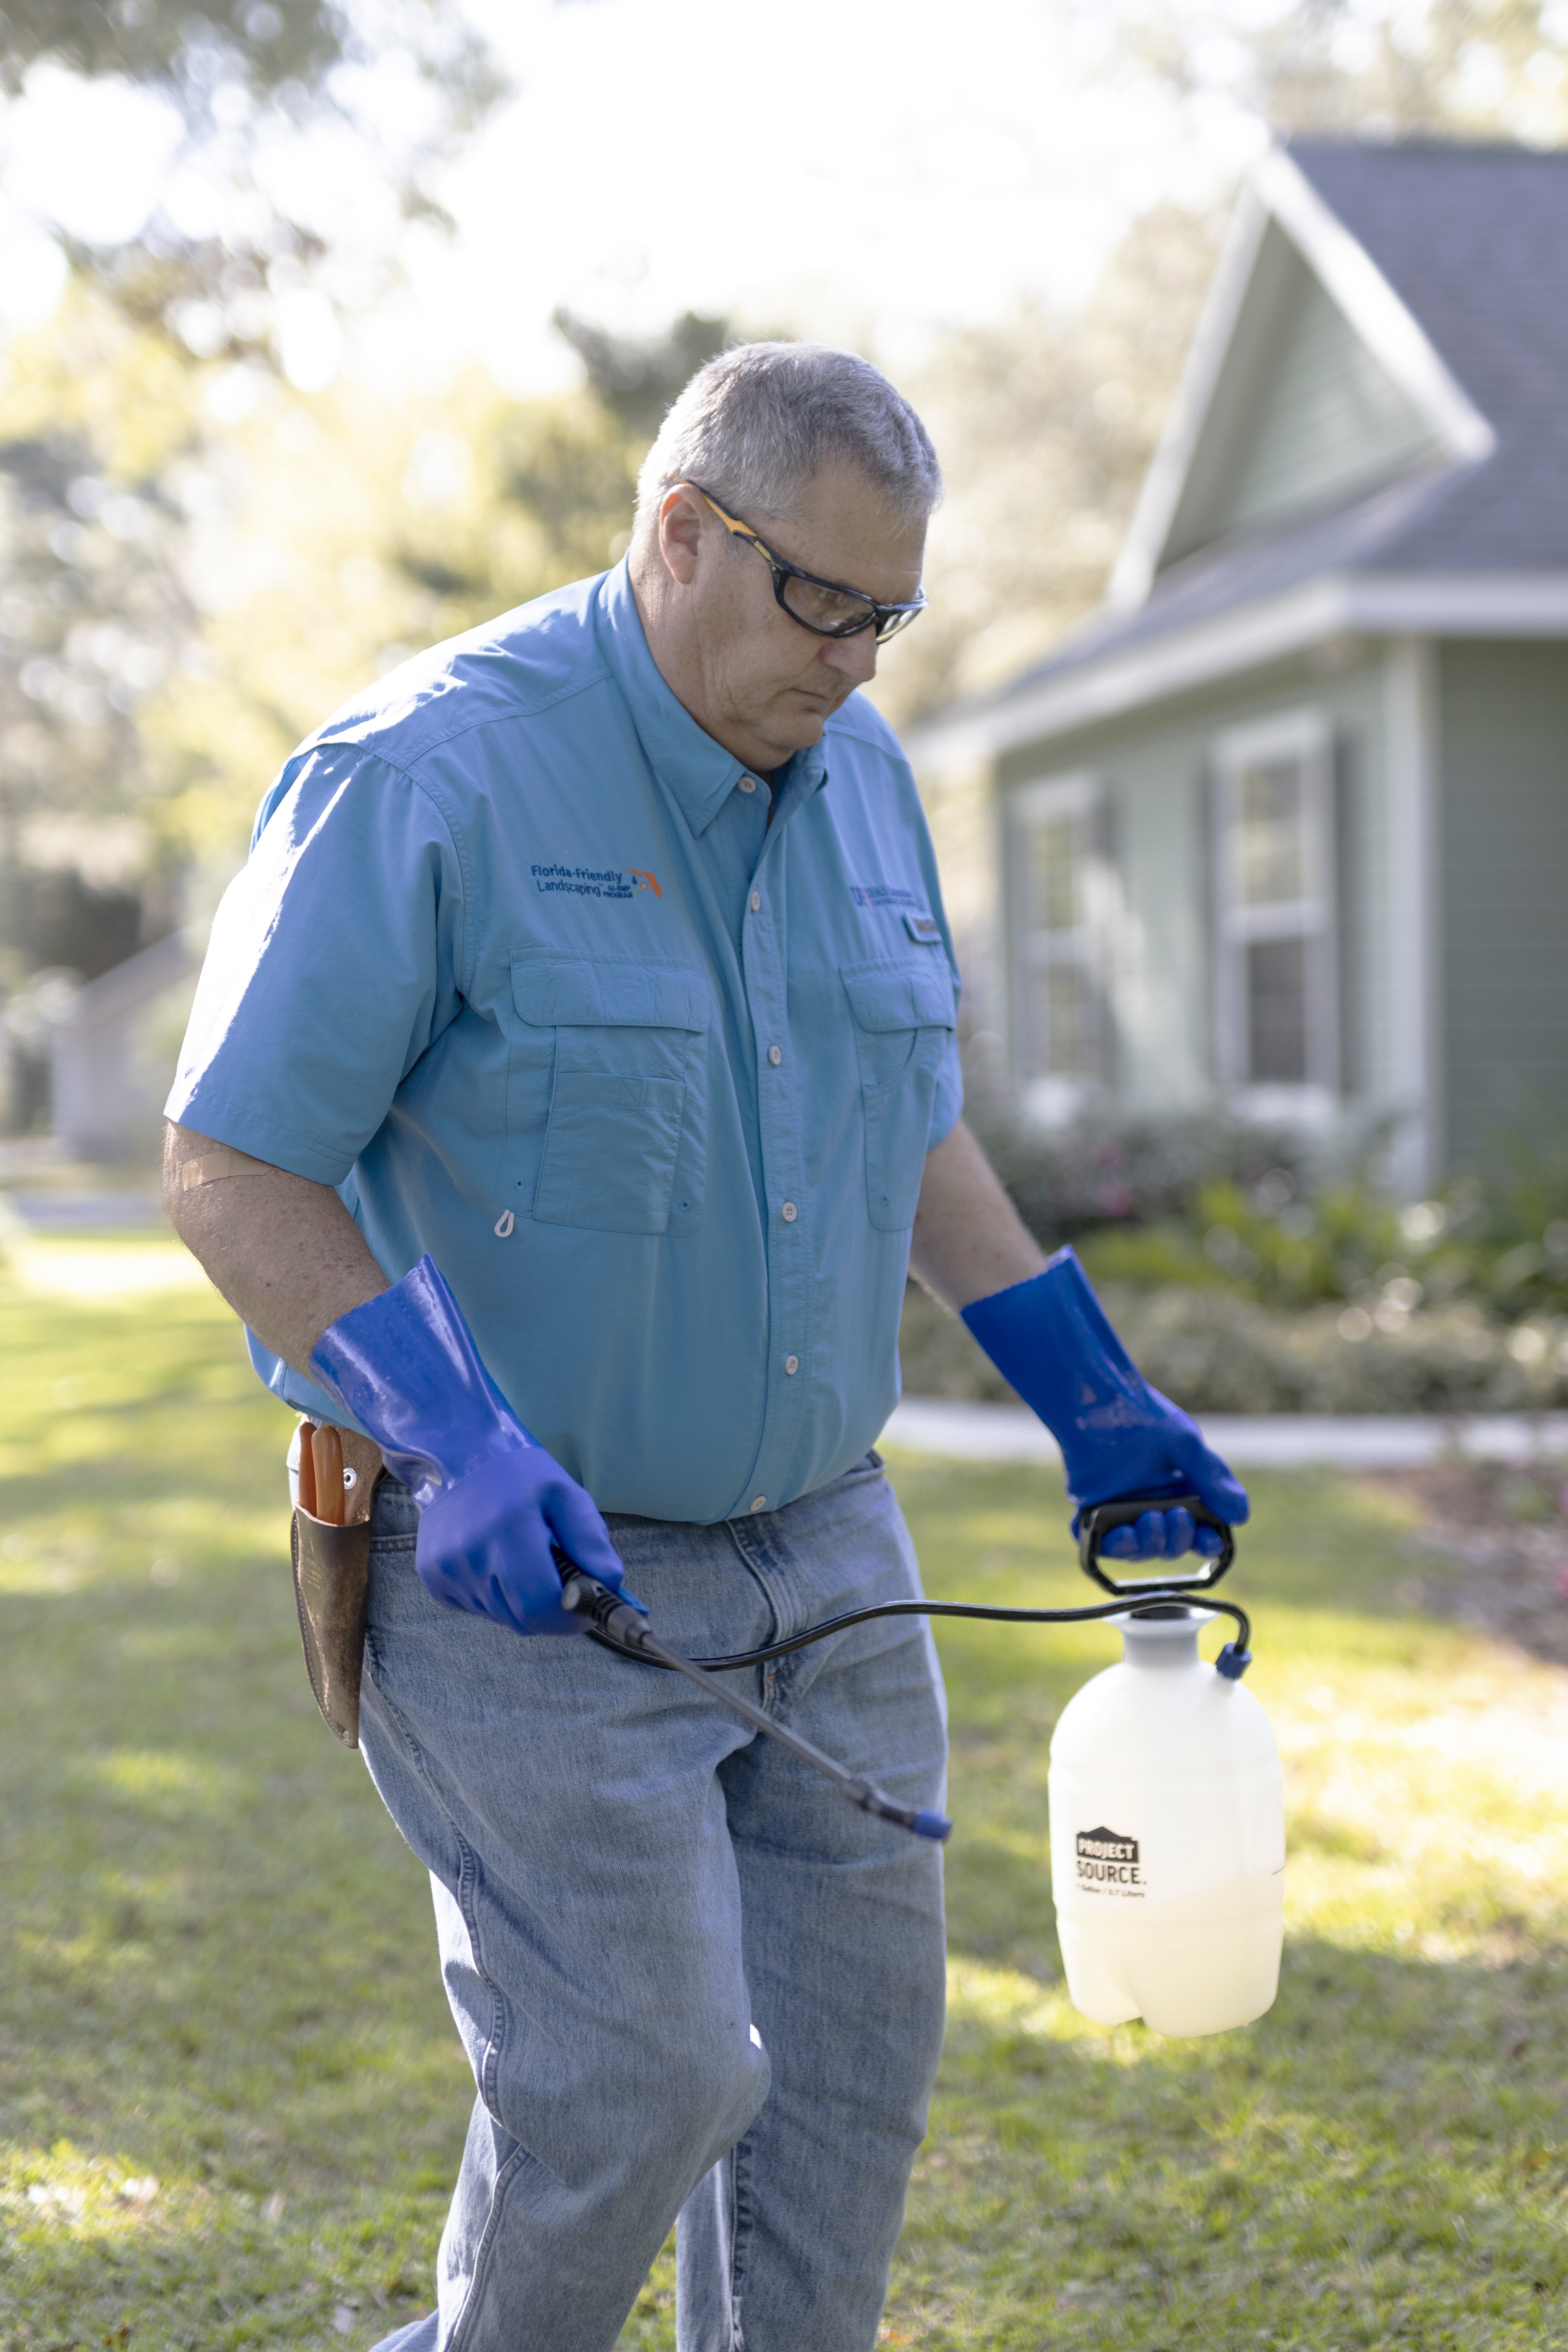 A man with gloves and PPE walking on a lawn.